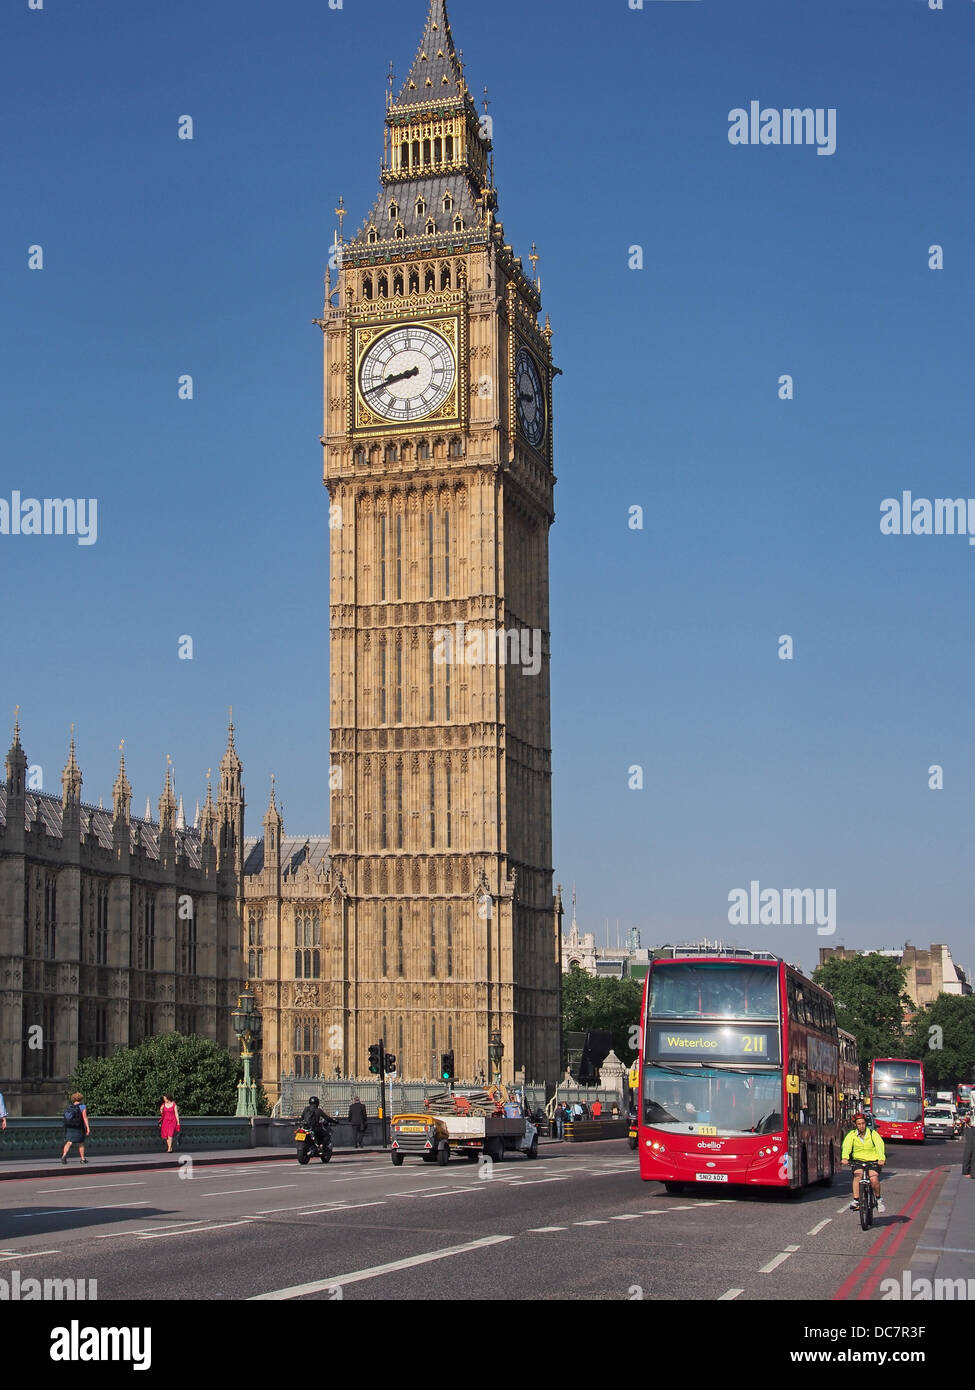 London Parliament Building and Westminster Bridge Stock Photo